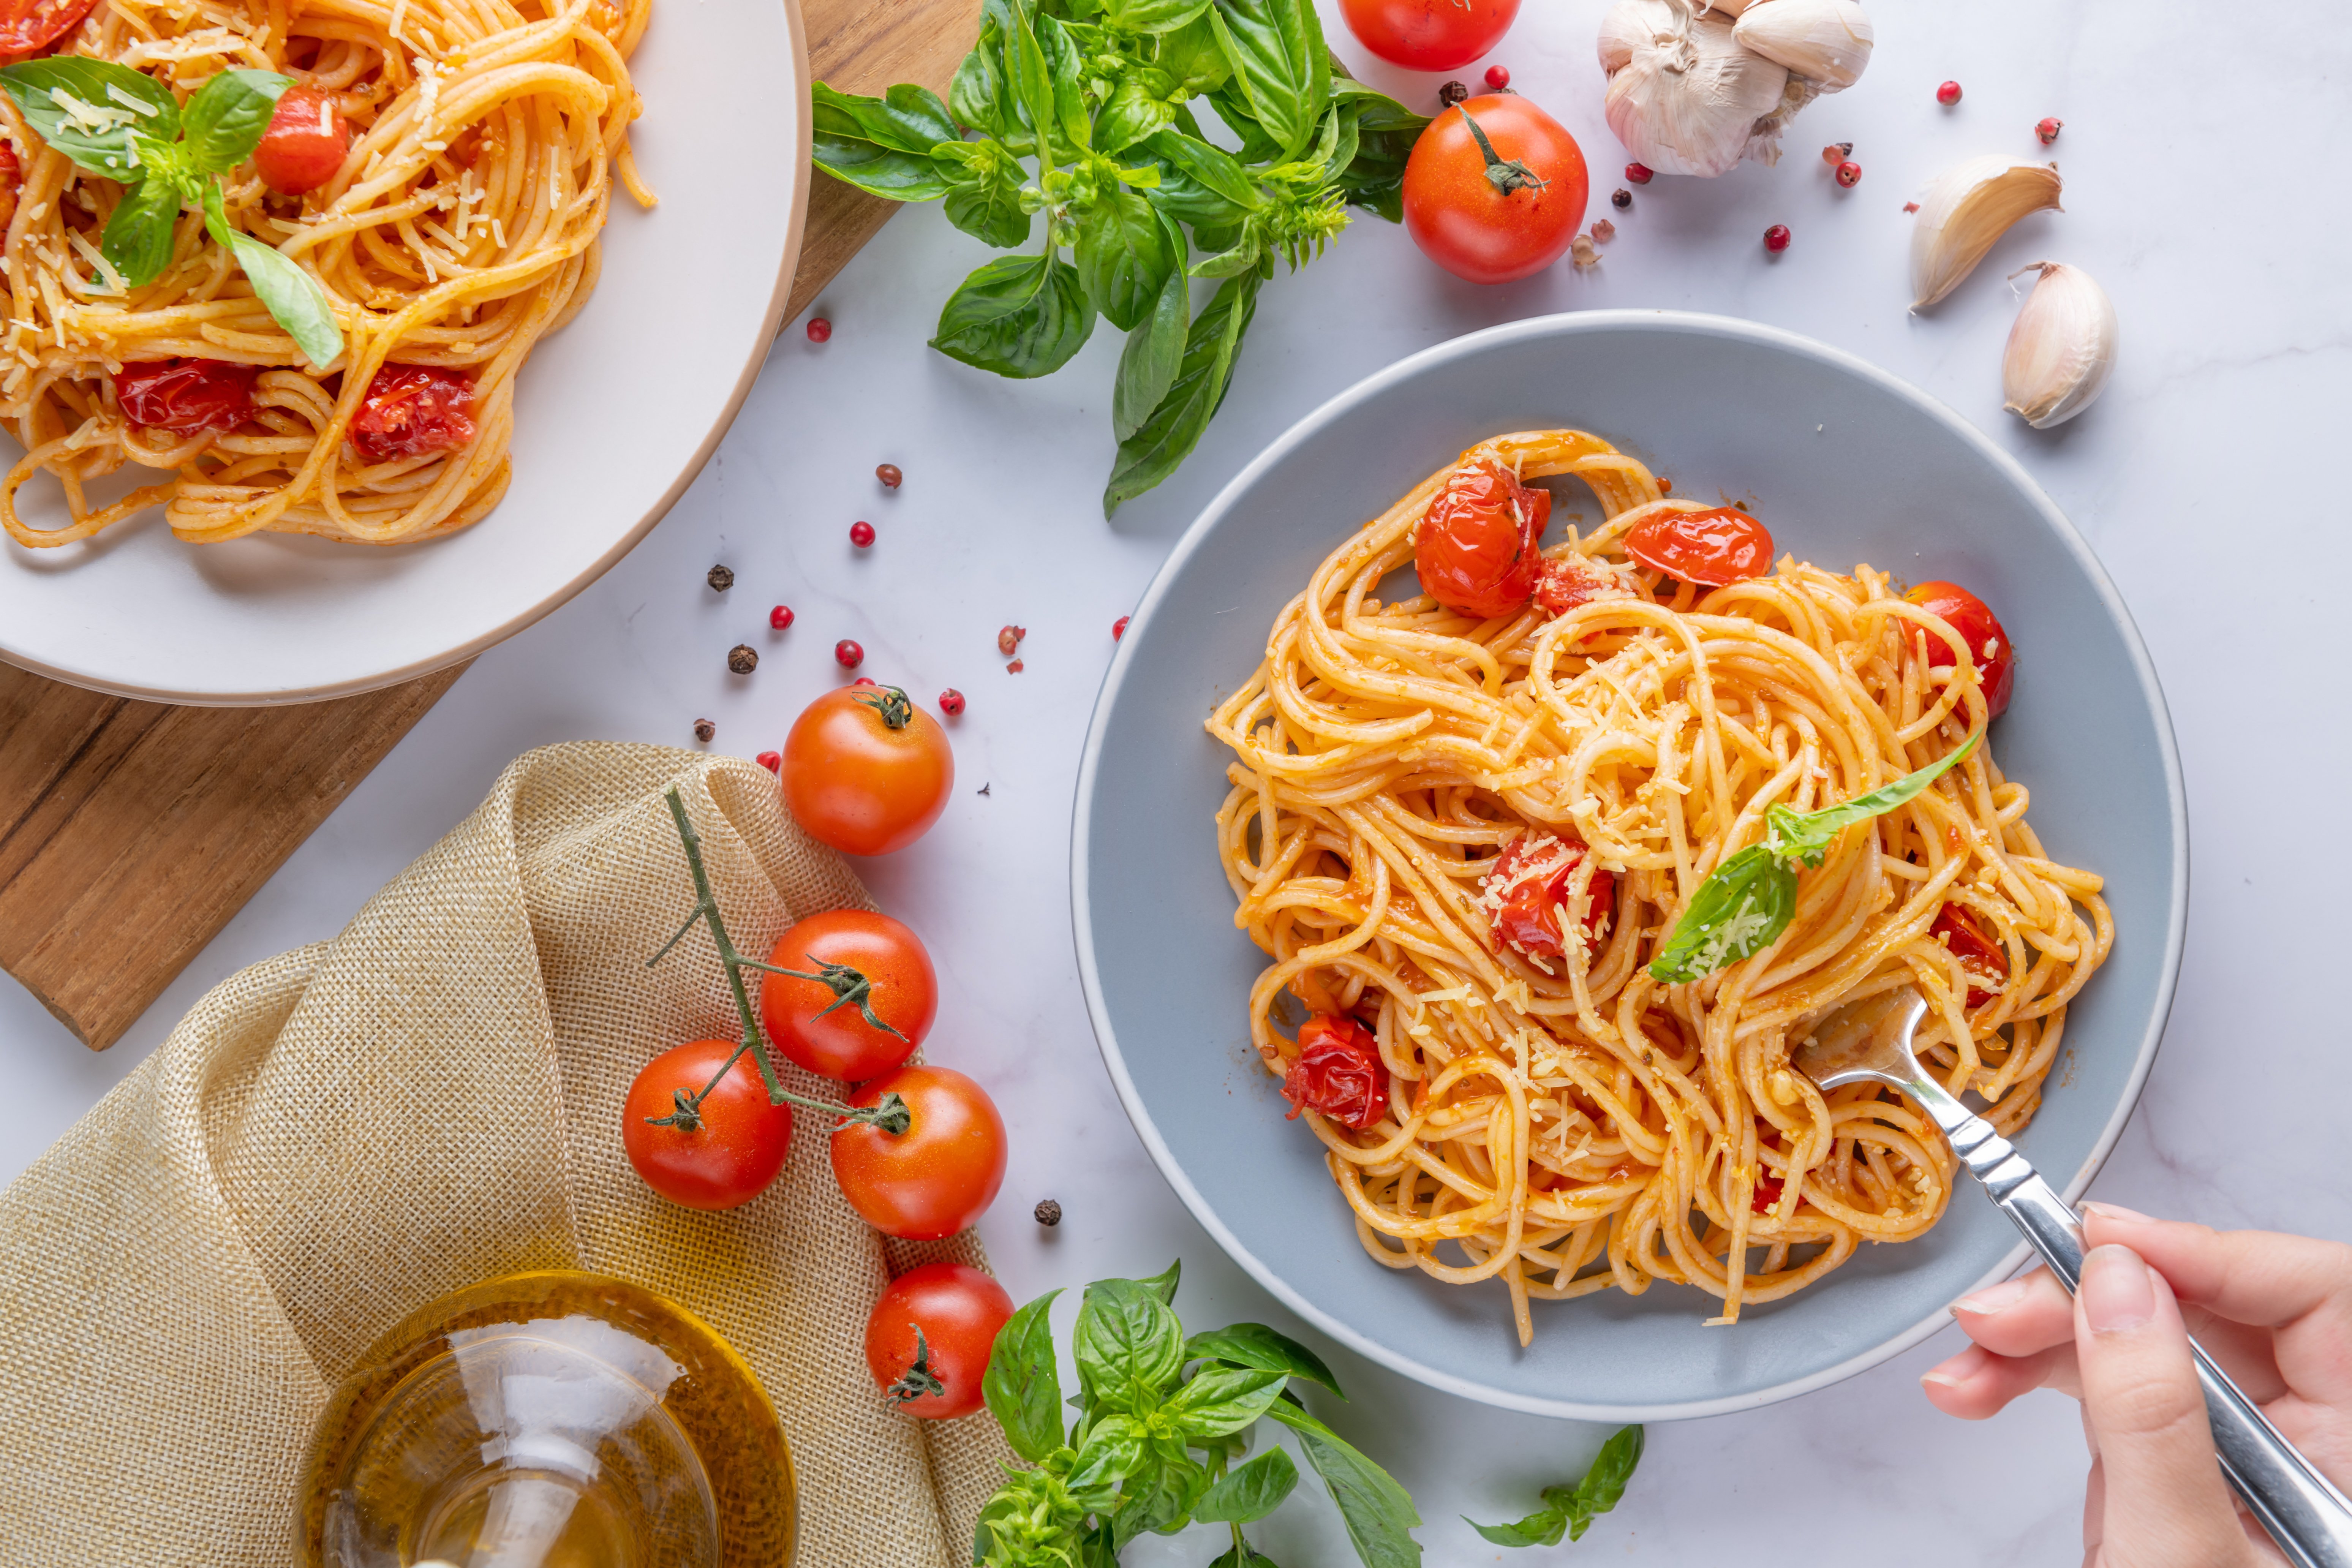 tasty-appetizing-classic-italian-spaghetti-pasta-with-tomato-sauce-cheese-parmesan-basil-plate-ingredients-cooking-pasta-white-marble-table-flat-lay-top-view-copy-space